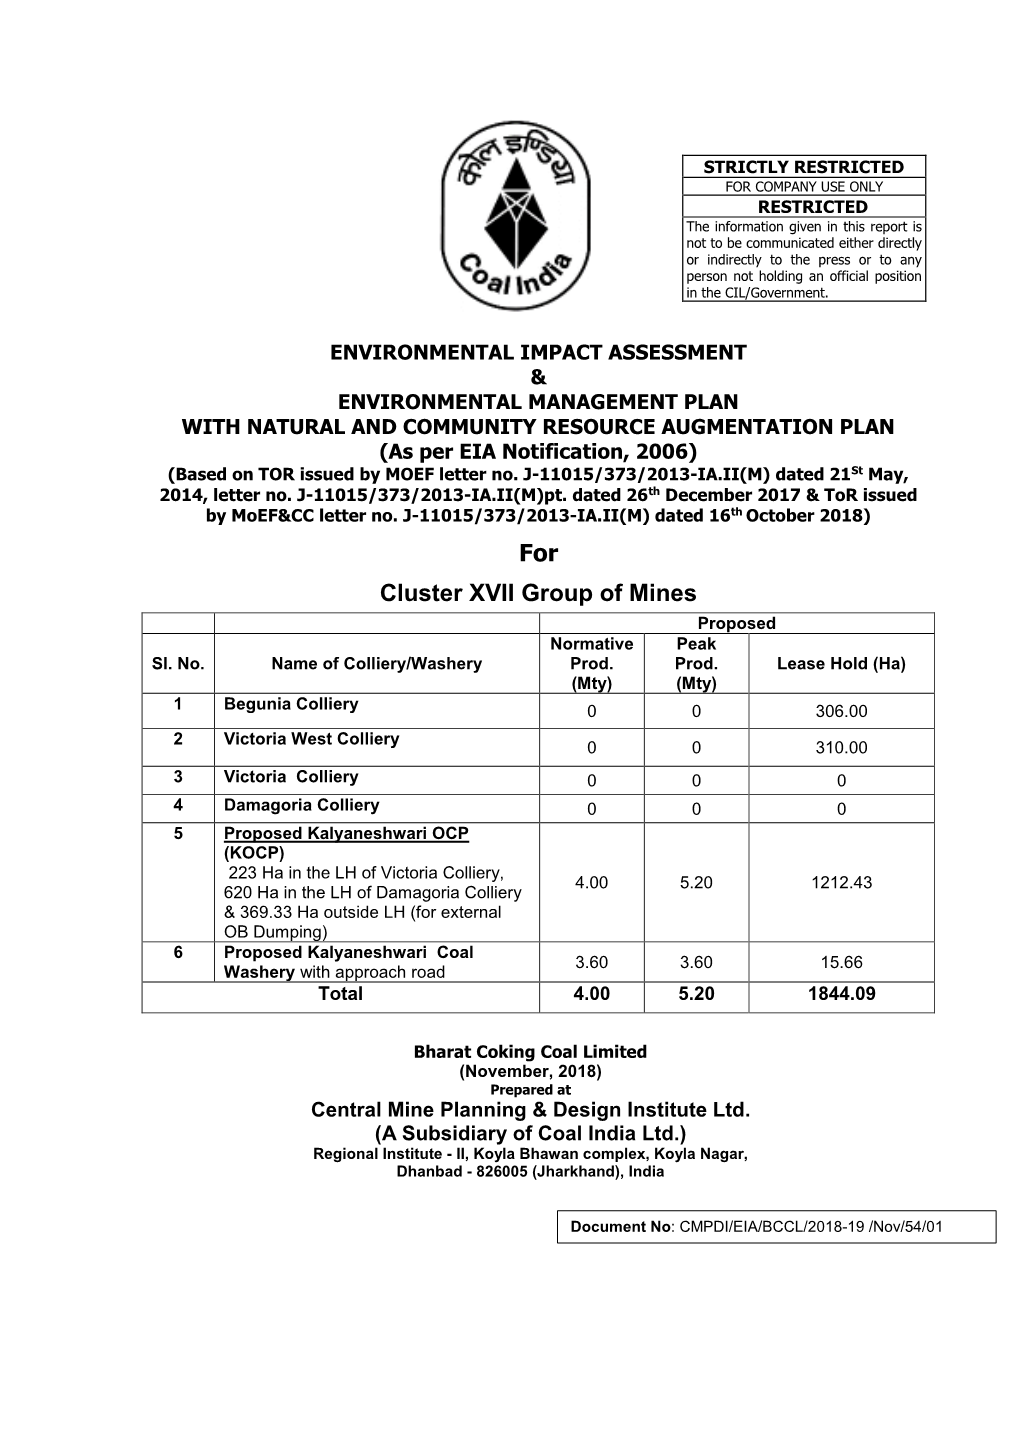 For Cluster XVII Group of Mines from Ministry of Environment & Forests, Govt